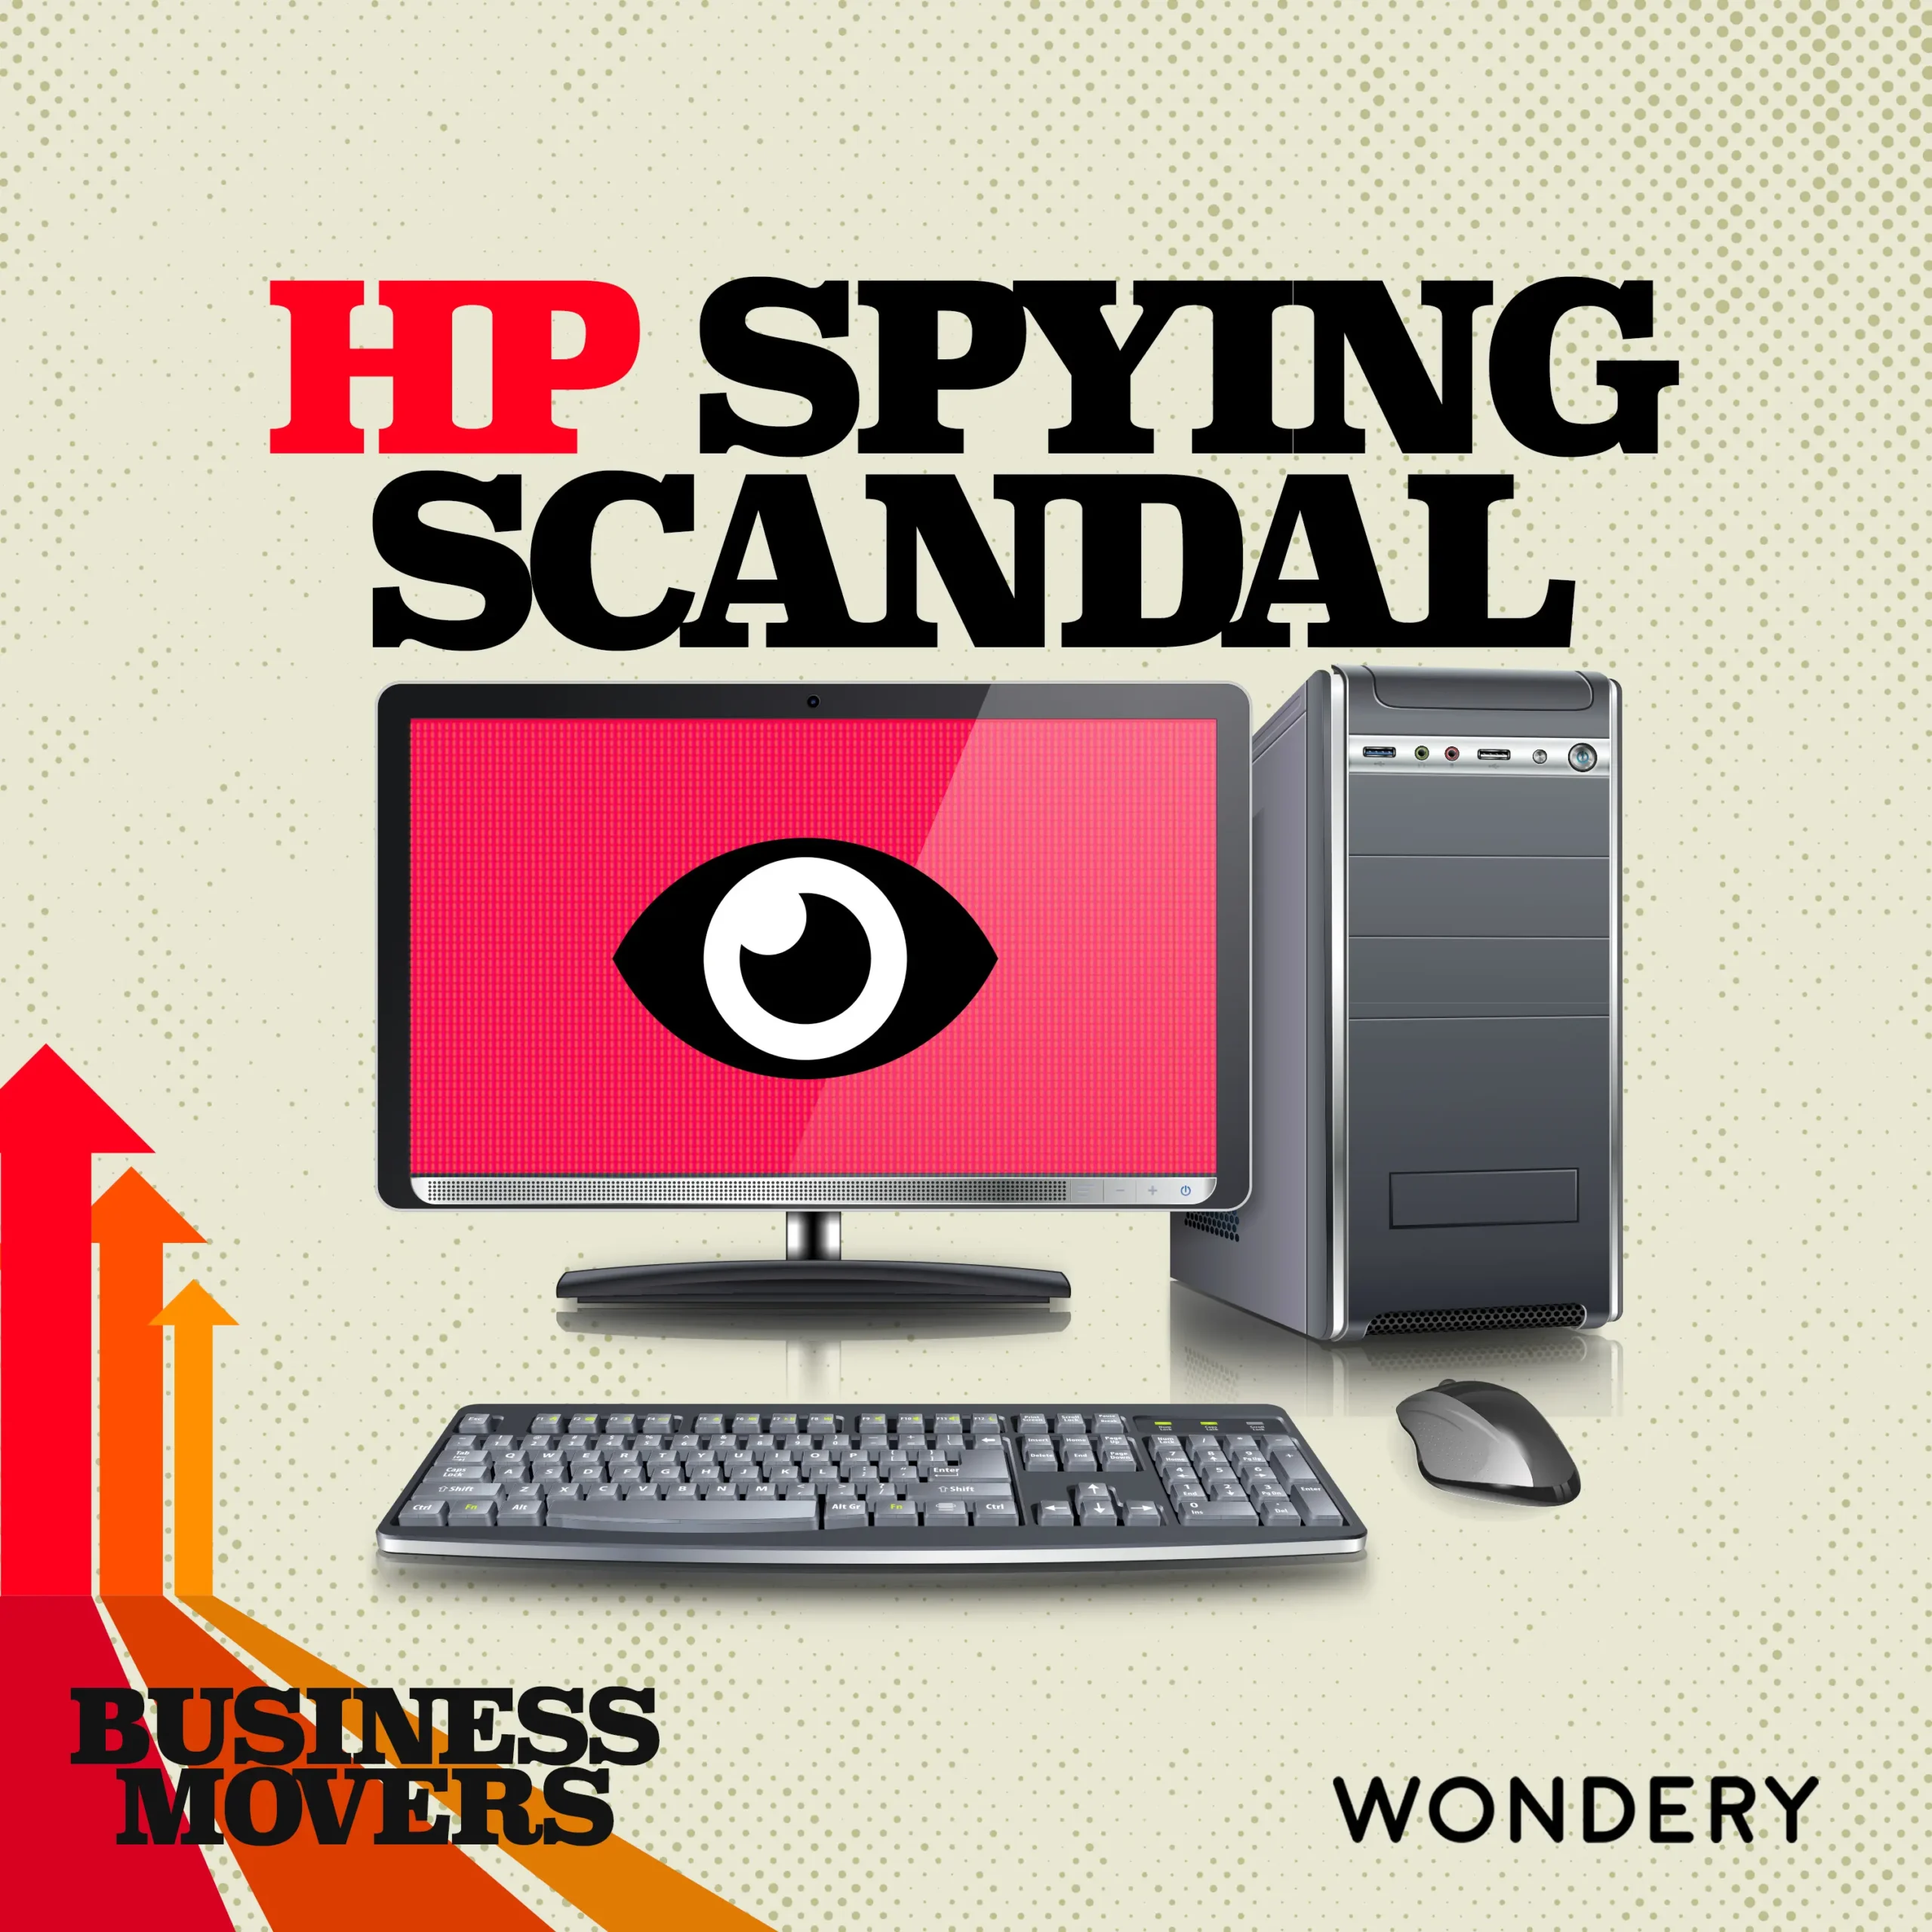 Hewlett packard spying scandal: unethical practices and controversial actions